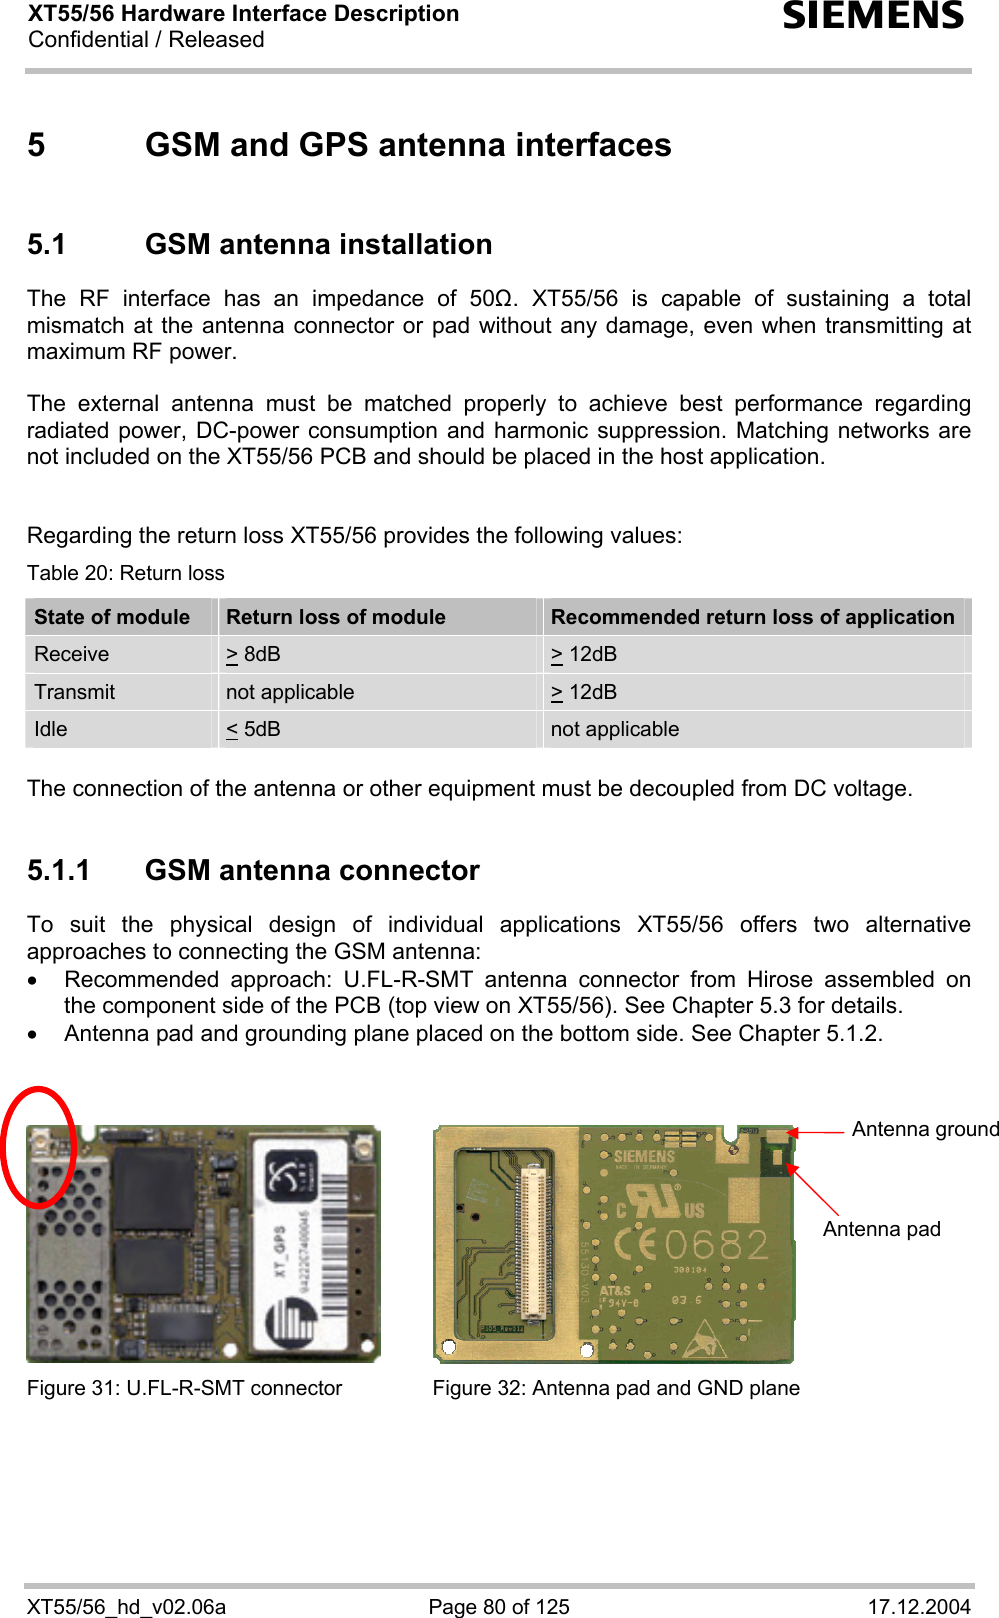 XT55/56 Hardware Interface Description Confidential / Released s XT55/56_hd_v02.06a  Page 80 of 125  17.12.2004 5  GSM and GPS antenna interfaces 5.1  GSM antenna installation The RF interface has an impedance of 50. XT55/56 is capable of sustaining a total mismatch at the antenna connector or pad without any damage, even when transmitting at maximum RF power.   The external antenna must be matched properly to achieve best performance regarding radiated power, DC-power consumption and harmonic suppression. Matching networks are not included on the XT55/56 PCB and should be placed in the host application.    Regarding the return loss XT55/56 provides the following values: Table 20: Return loss State of module  Return loss of module  Recommended return loss of application Receive  &gt; 8dB  &gt; 12dB  Transmit   not applicable   &gt; 12dB  Idle  &lt; 5dB   not applicable  The connection of the antenna or other equipment must be decoupled from DC voltage.  5.1.1  GSM antenna connector To suit the physical design of individual applications XT55/56 offers two alternative approaches to connecting the GSM antenna:  •  Recommended approach: U.FL-R-SMT antenna connector from Hirose assembled on the component side of the PCB (top view on XT55/56). See Chapter 5.3 for details. •  Antenna pad and grounding plane placed on the bottom side. See Chapter 5.1.2.       Figure 31: U.FL-R-SMT connector  Figure 32: Antenna pad and GND plane   Antenna pad Antenna ground 